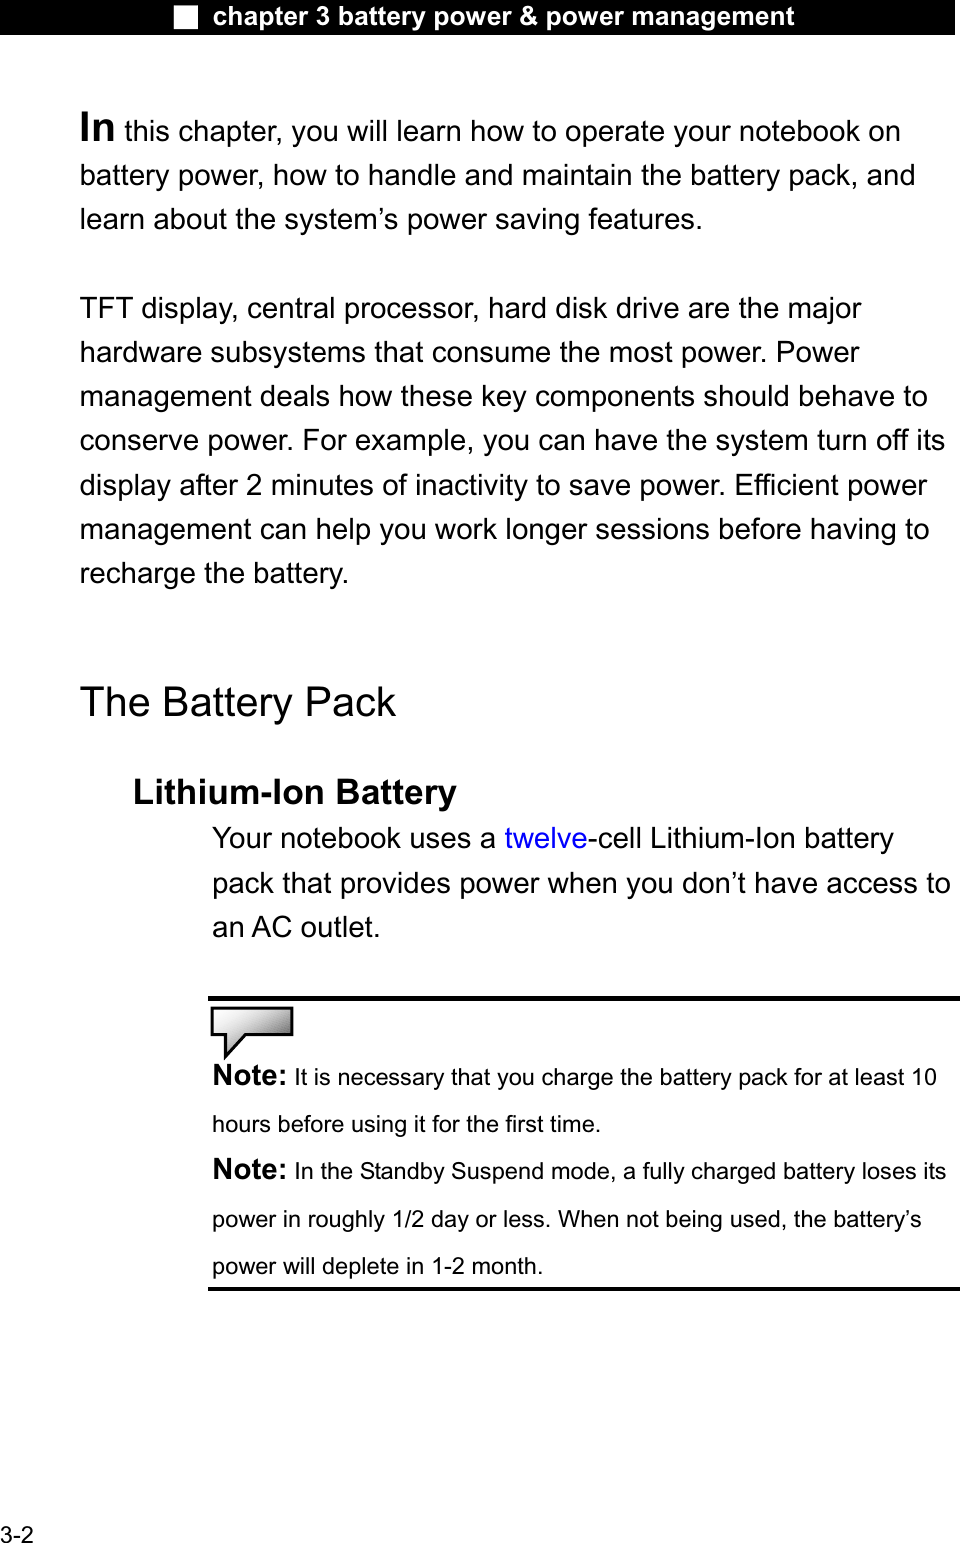 Ϯ chapter 3 battery power &amp; power managementIn this chapter, you will learn how to operate your notebook on battery power, how to handle and maintain the battery pack, andlearn about the system’s power saving features.TFT display, central processor, hard disk drive are the major hardware subsystems that consume the most power. Powermanagement deals how these key components should behave to conserve power. For example, you can have the system turn off itsdisplay after 2 minutes of inactivity to save power. Efficient powermanagement can help you work longer sessions before having to recharge the battery.The Battery Pack Lithium-Ion BatteryYour notebook uses a twelve-cell Lithium-Ion batterypack that provides power when you don’t have access to an AC outlet.Note: It is necessary that you charge the battery pack for at least 10 hours before using it for the first time.Note: In the Standby Suspend mode, a fully charged battery loses itspower in roughly 1/2 day or less. When not being used, the battery’spower will deplete in 1-2 month.3-2